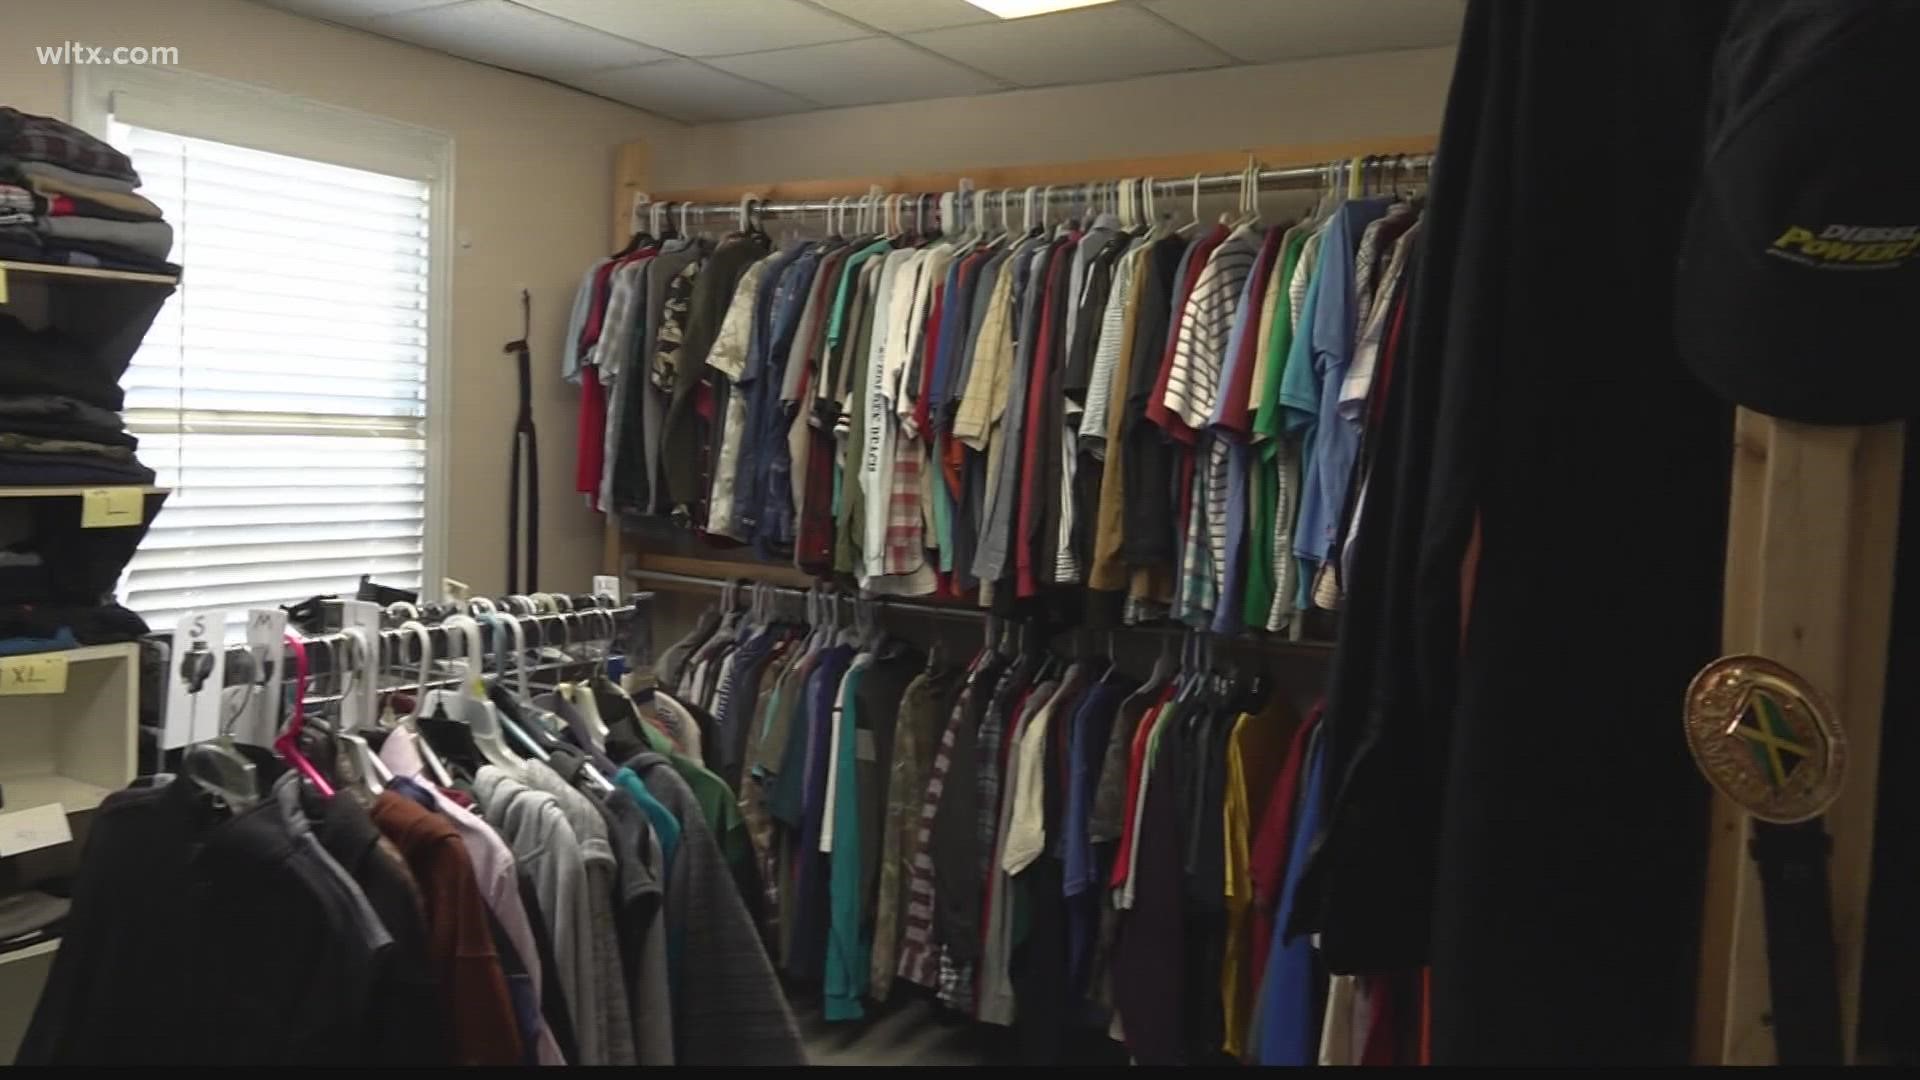 Community Clothes Closet – Free clothing for all people in need.